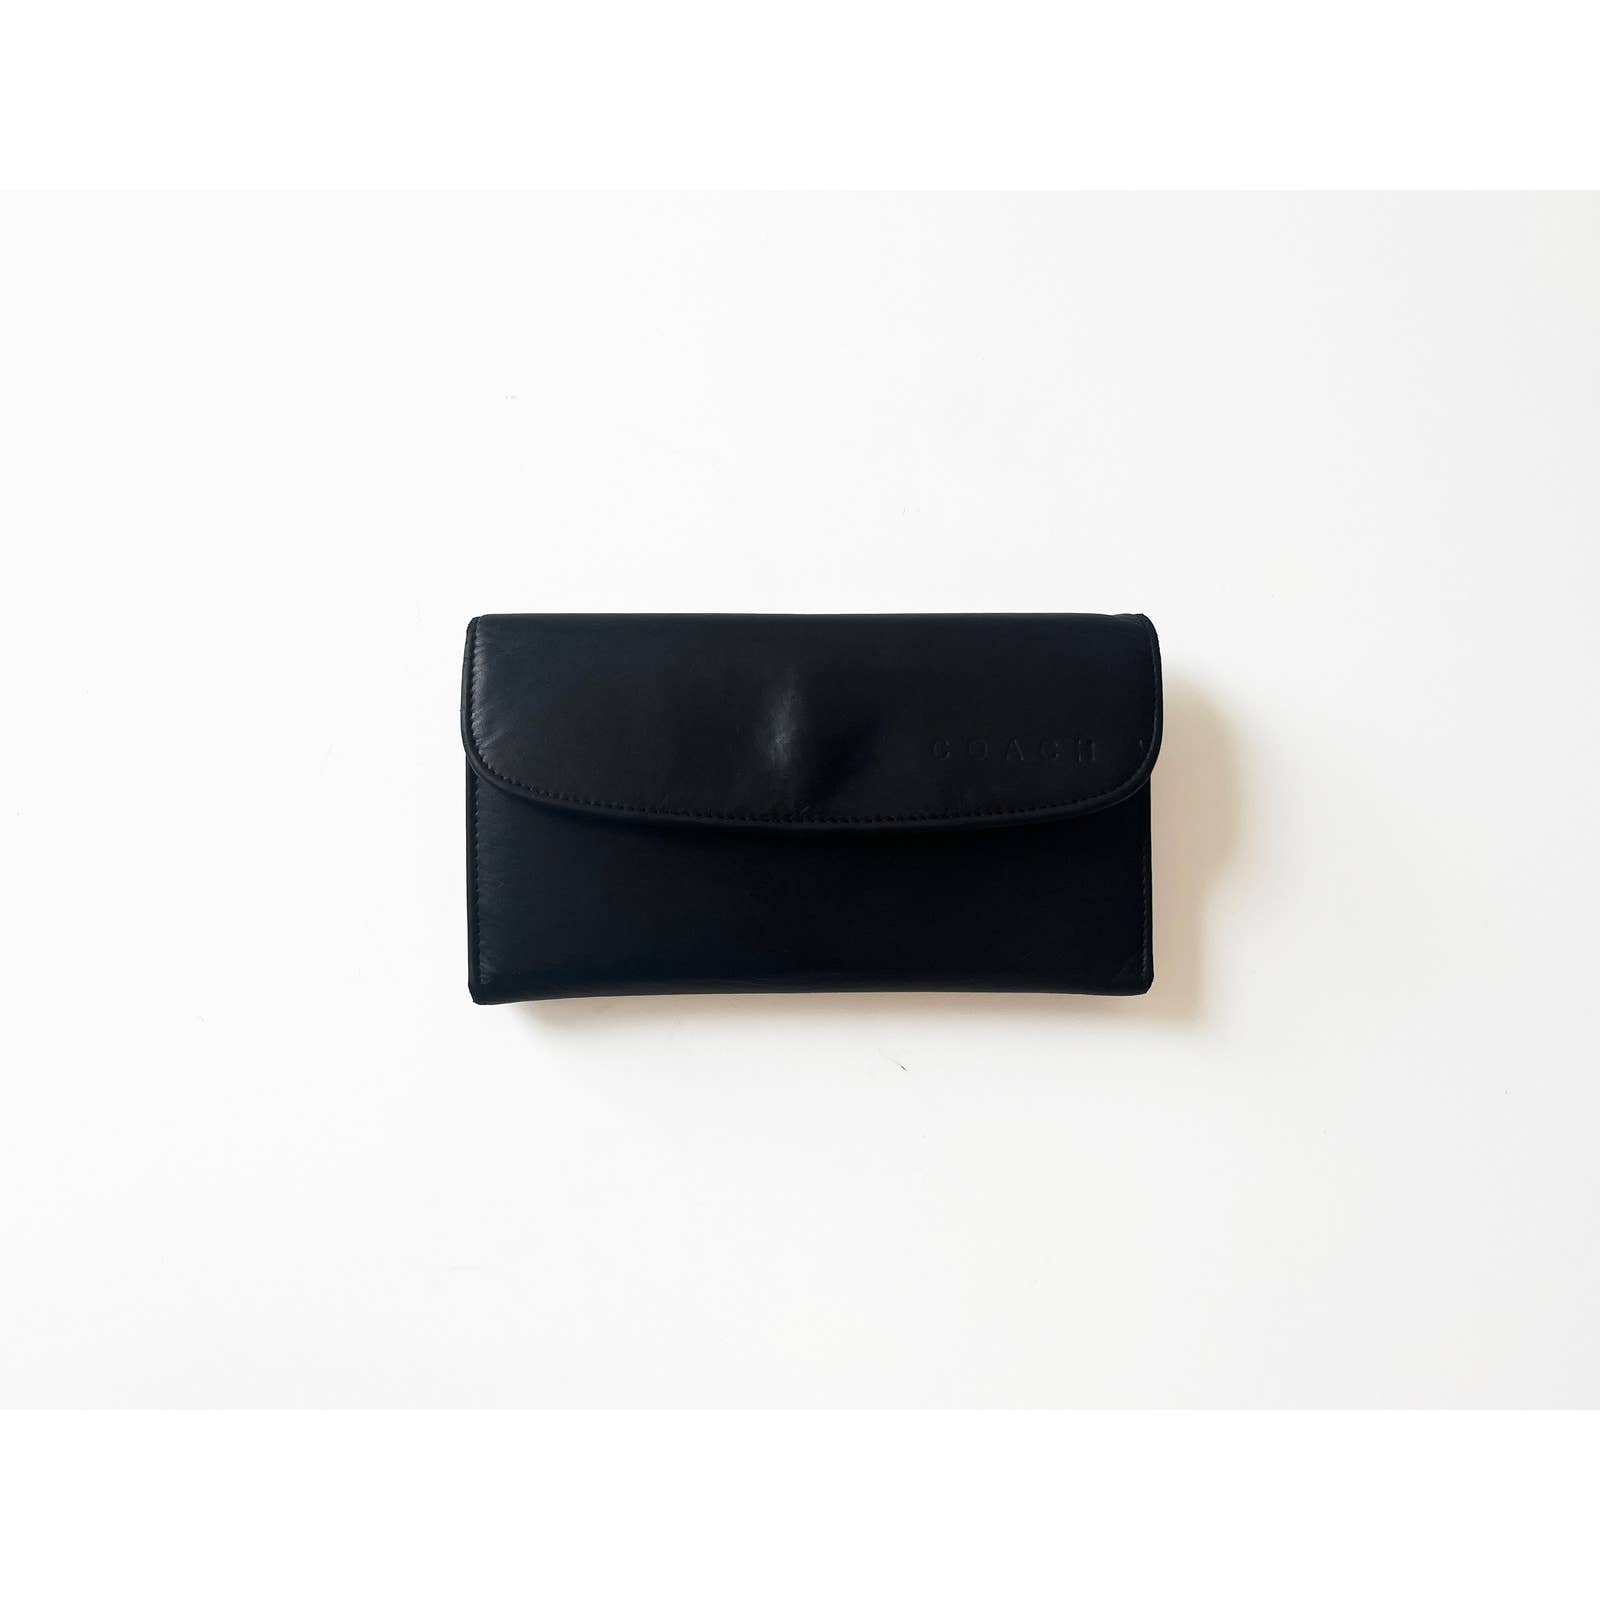 Dogon Leather Wallet Combination Purse With Dust Bag For Women From  Realfine888, $97.99 | DHgate.Com